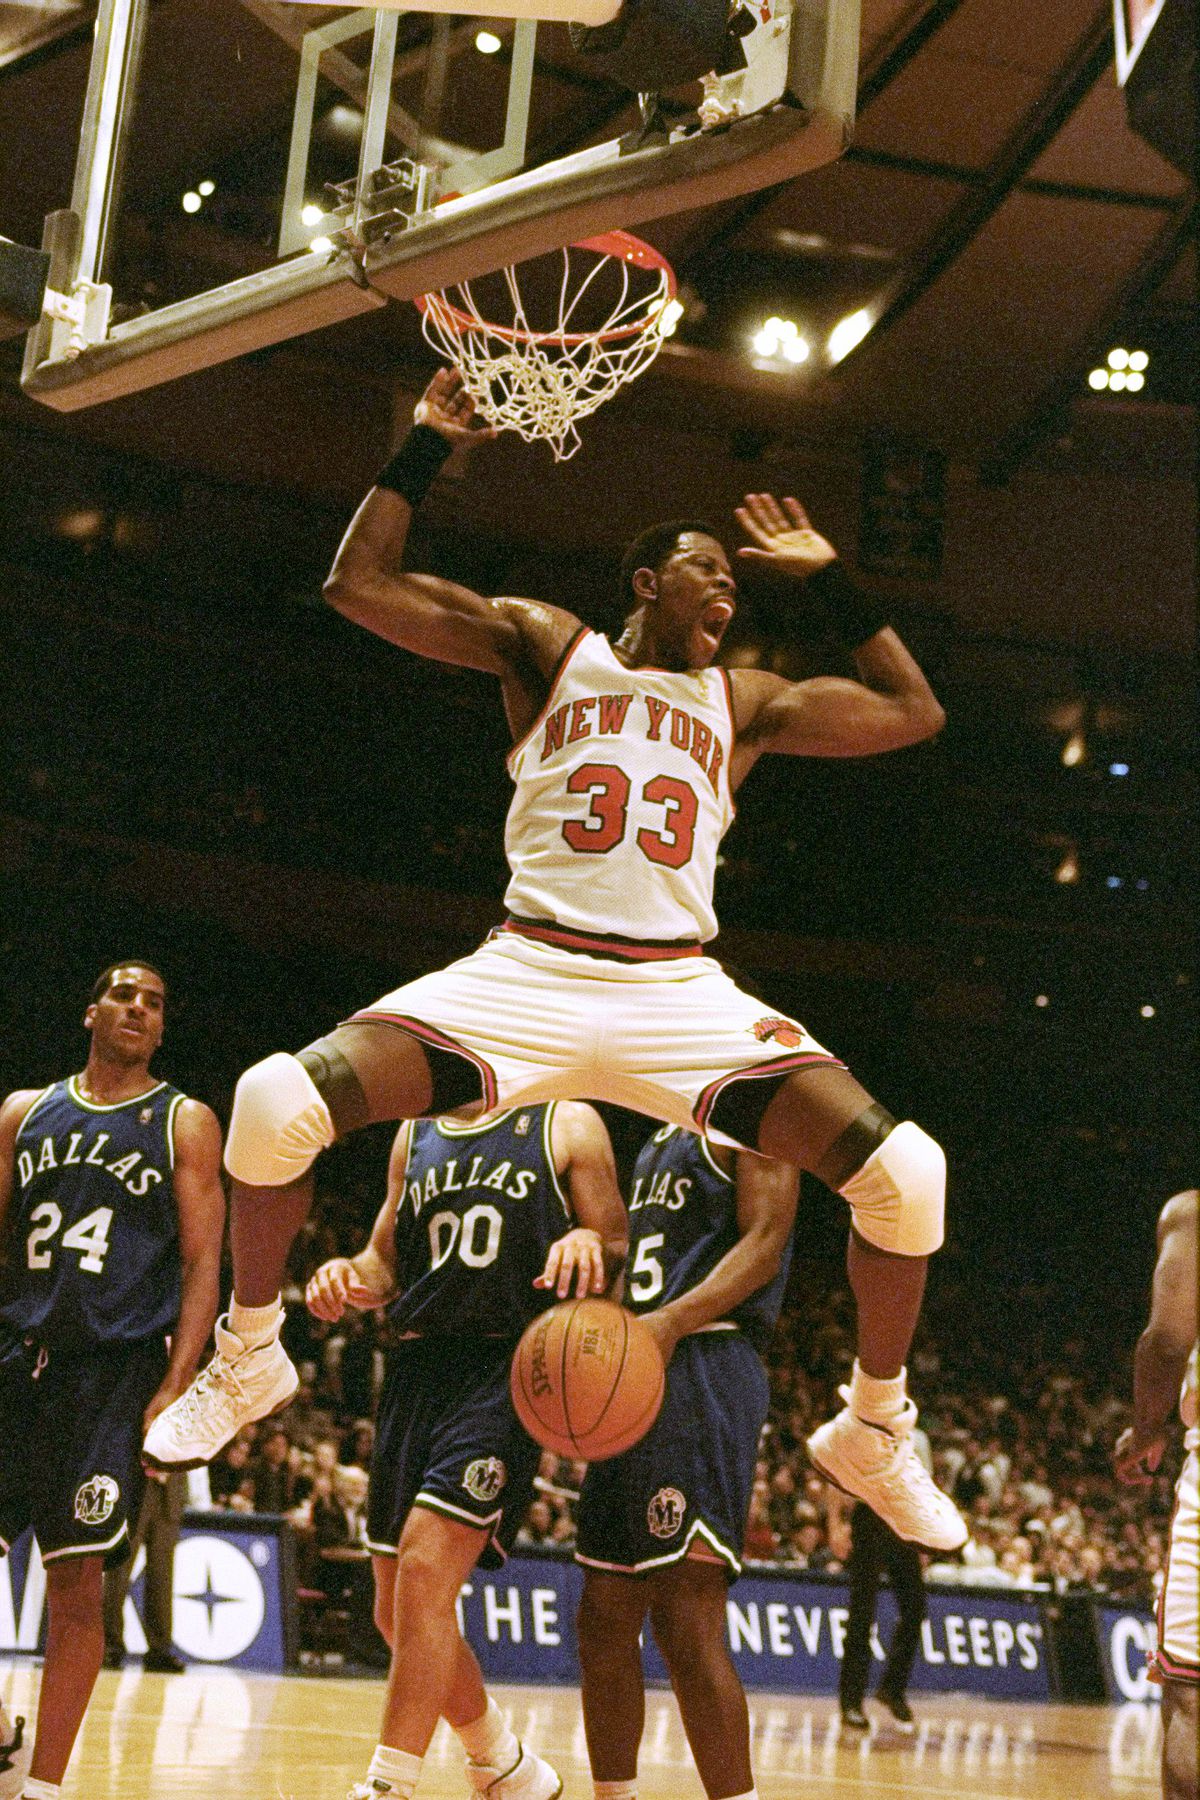 Patrick Ewing (33) of the New York Knicks dunks during game